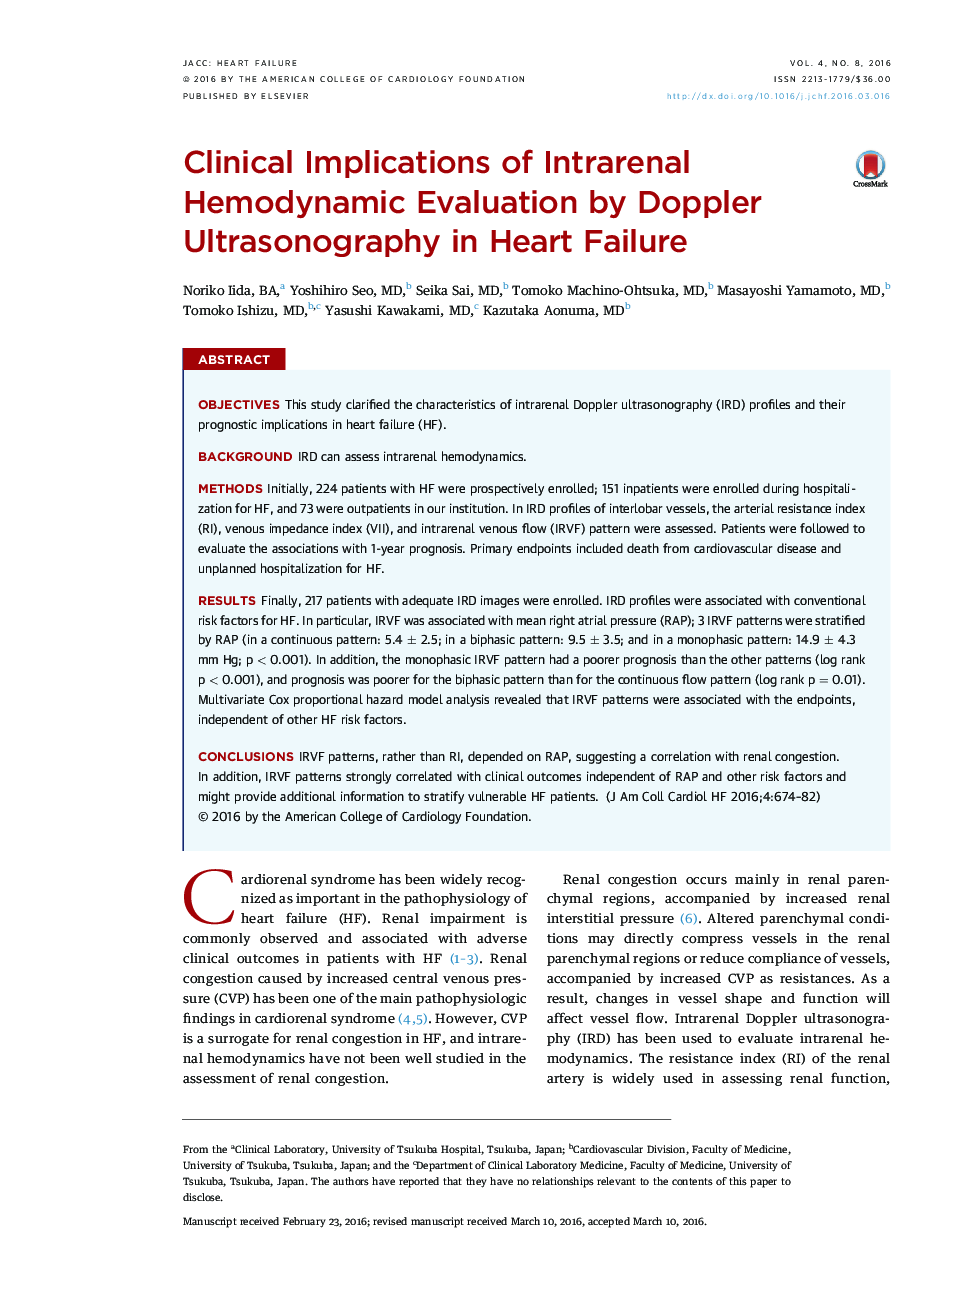 Clinical Implications of Intrarenal Hemodynamic Evaluation by Doppler Ultrasonography in Heart Failure 